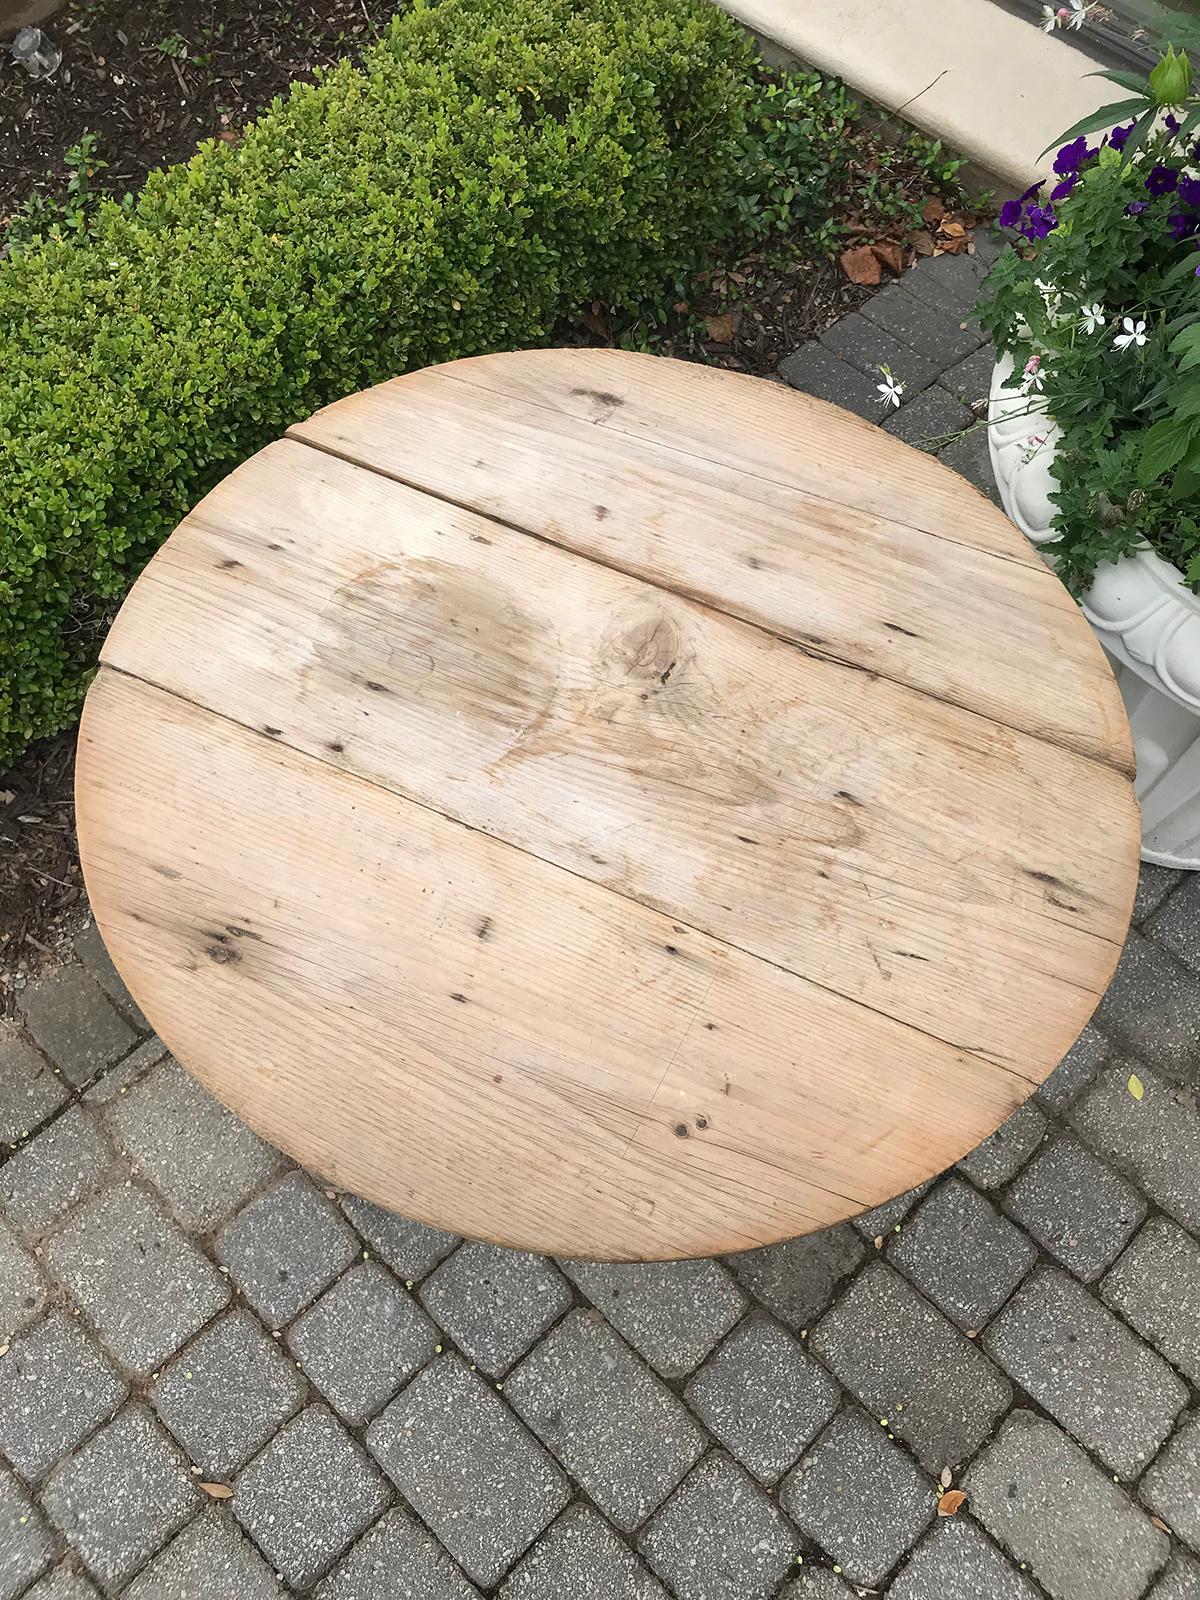 19th Century Round Pine Pub Table with Old Bleached Finish 1